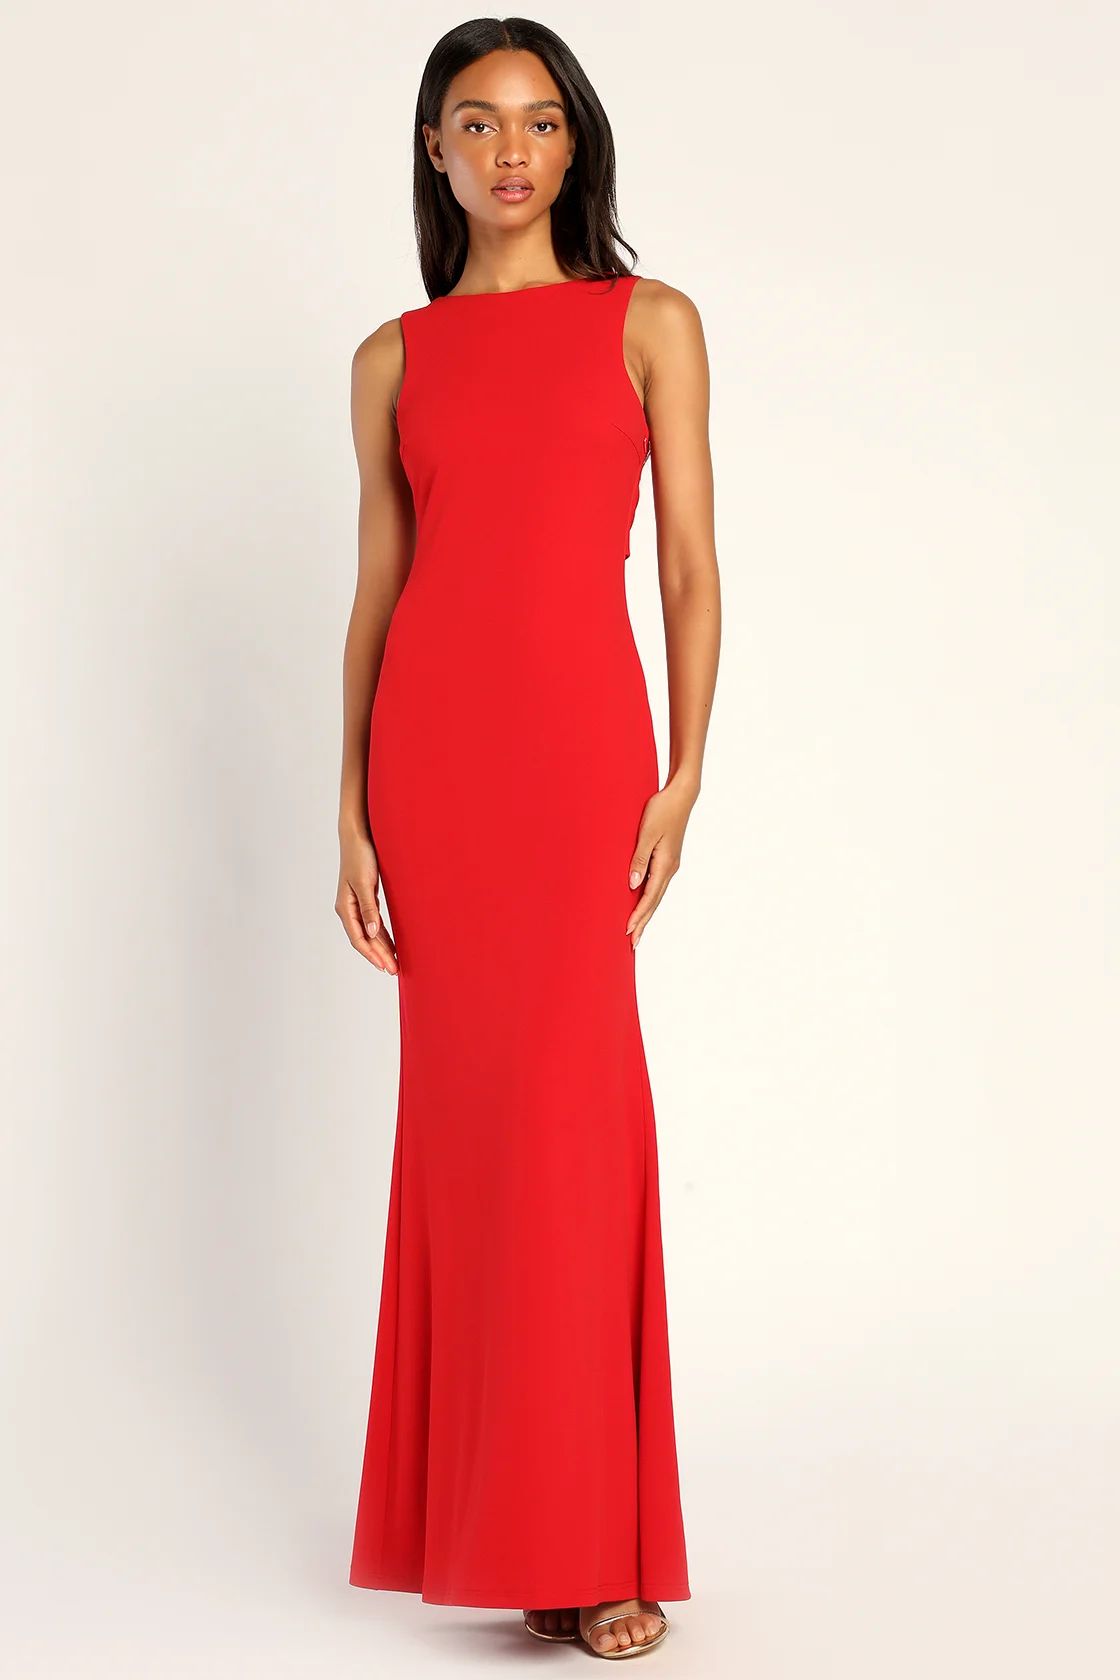 Love in Your Eyes Red Knotted Mermaid Maxi Dress | Lulus (US)